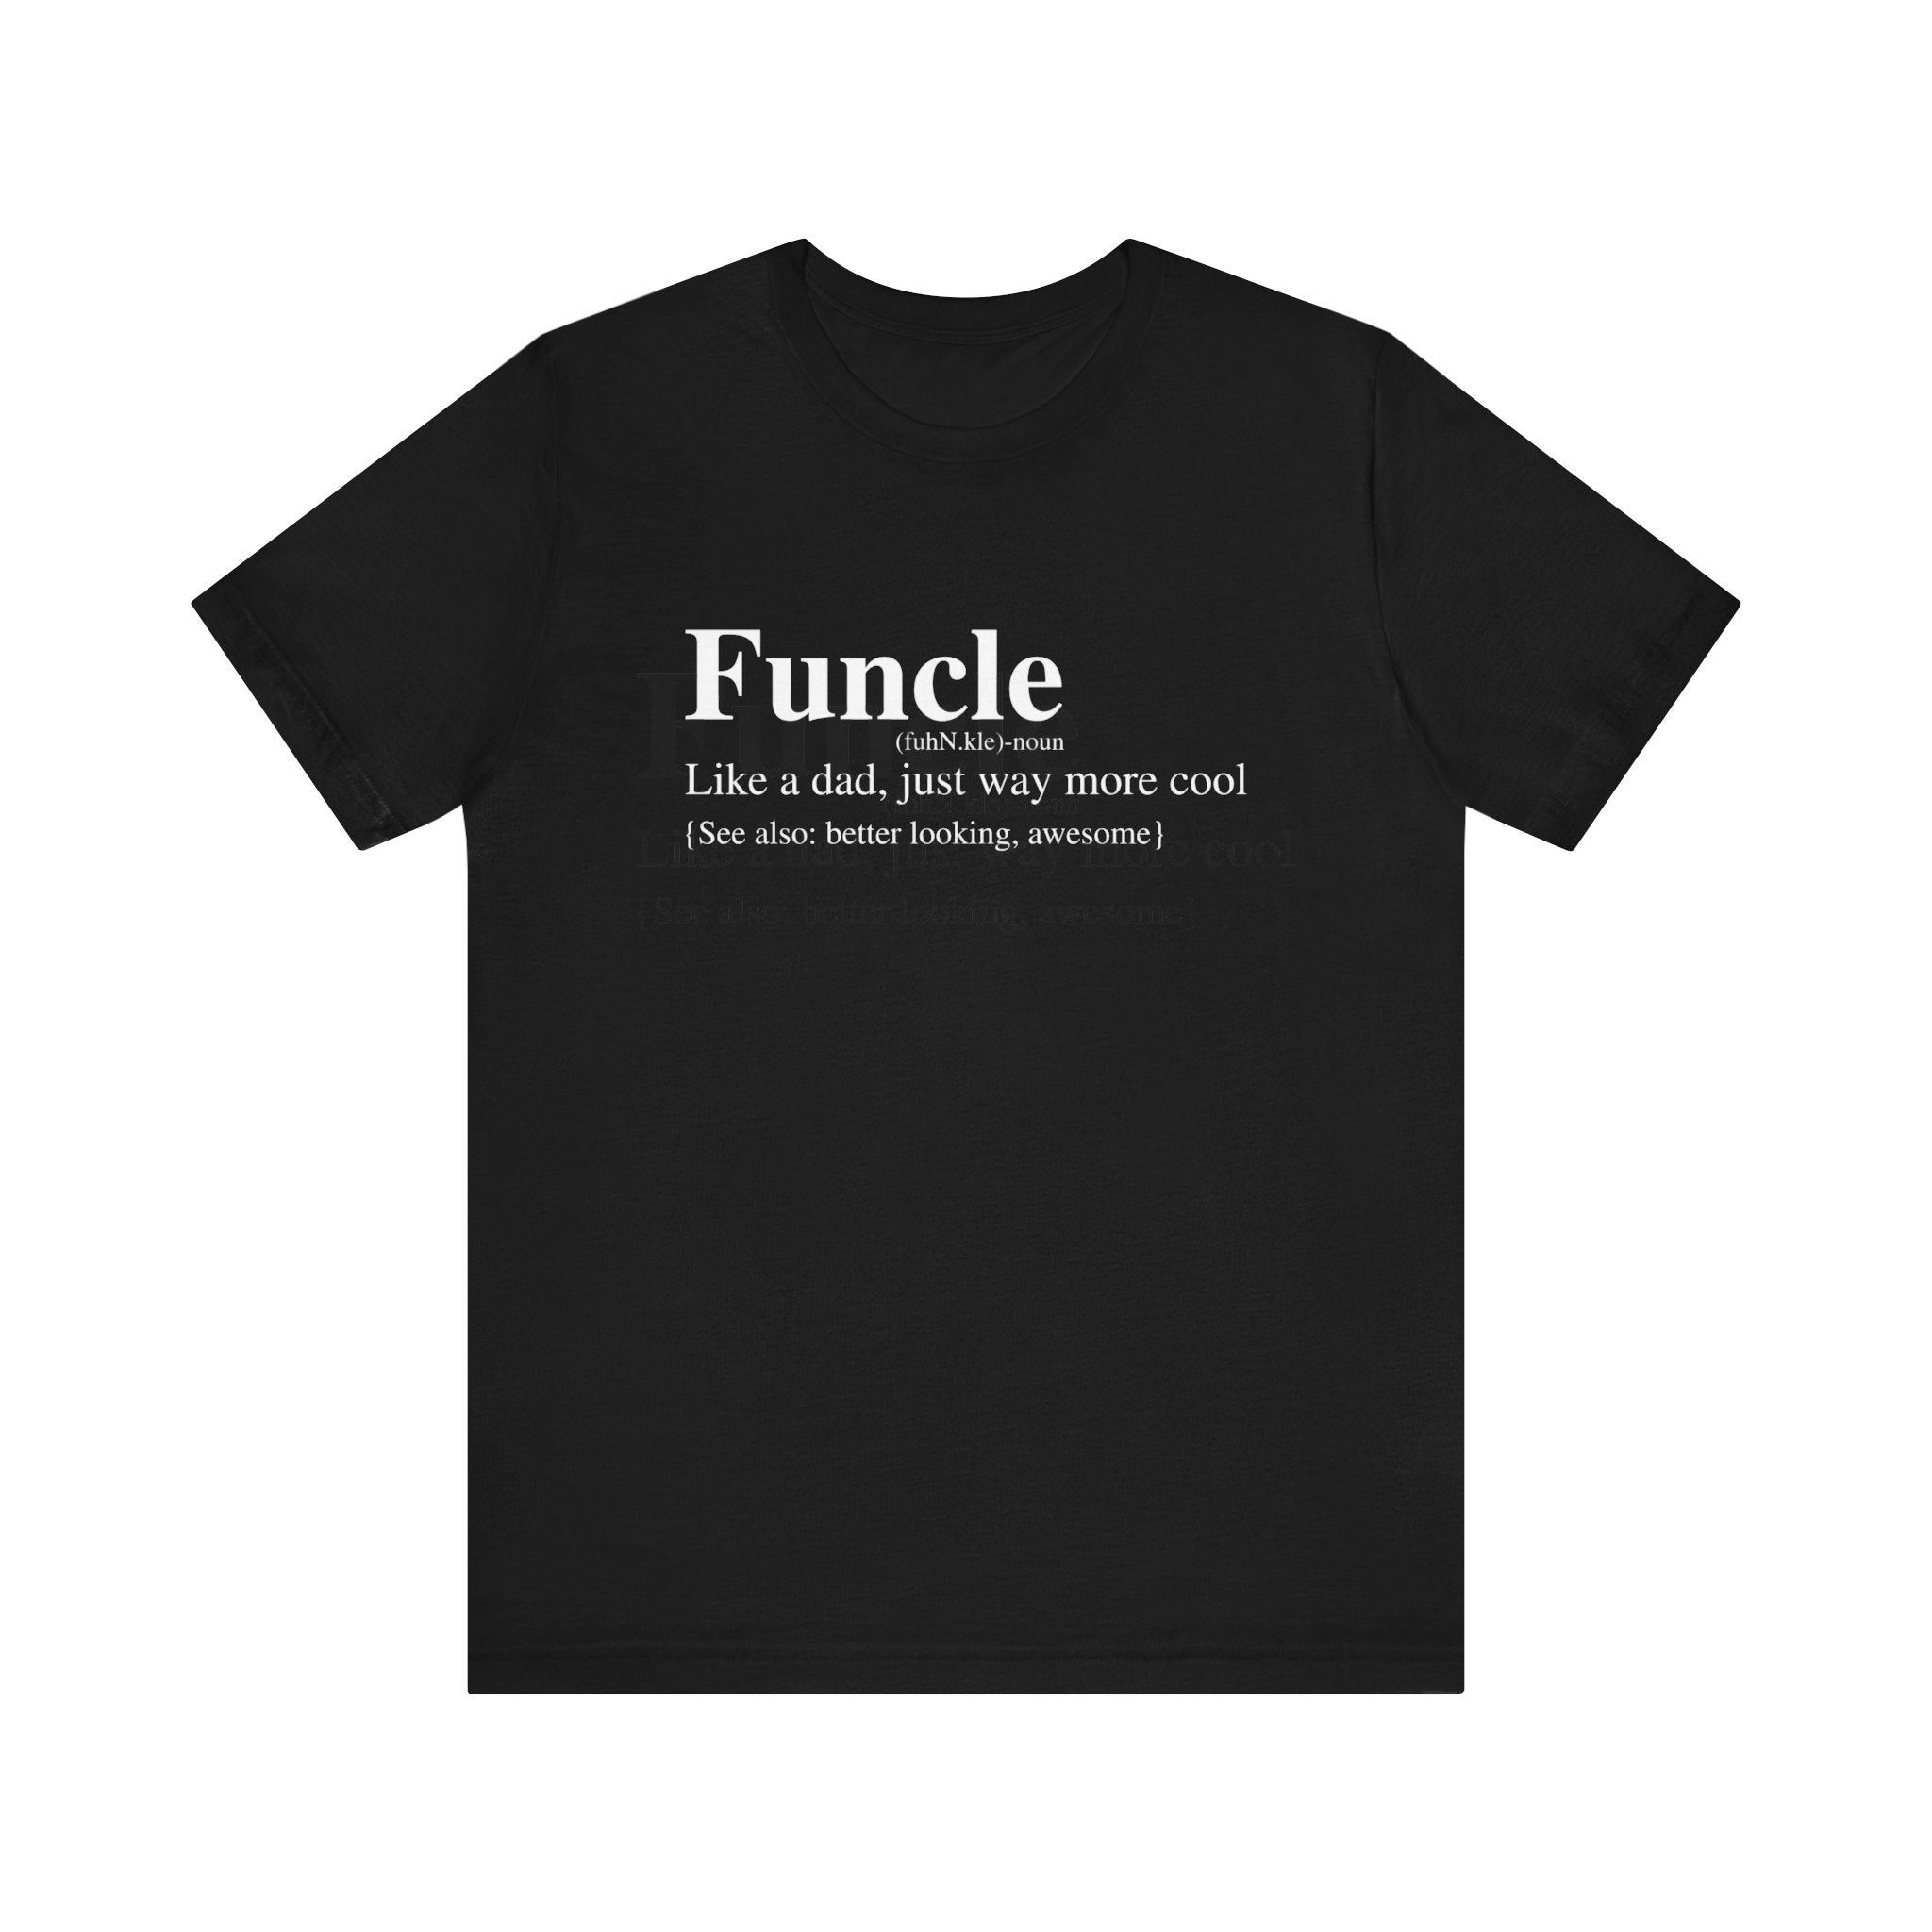 Black Funcle T-Shirt with the text "Funcle: like a dad, just way more cool (see also: better looking, awesome)" in white font.